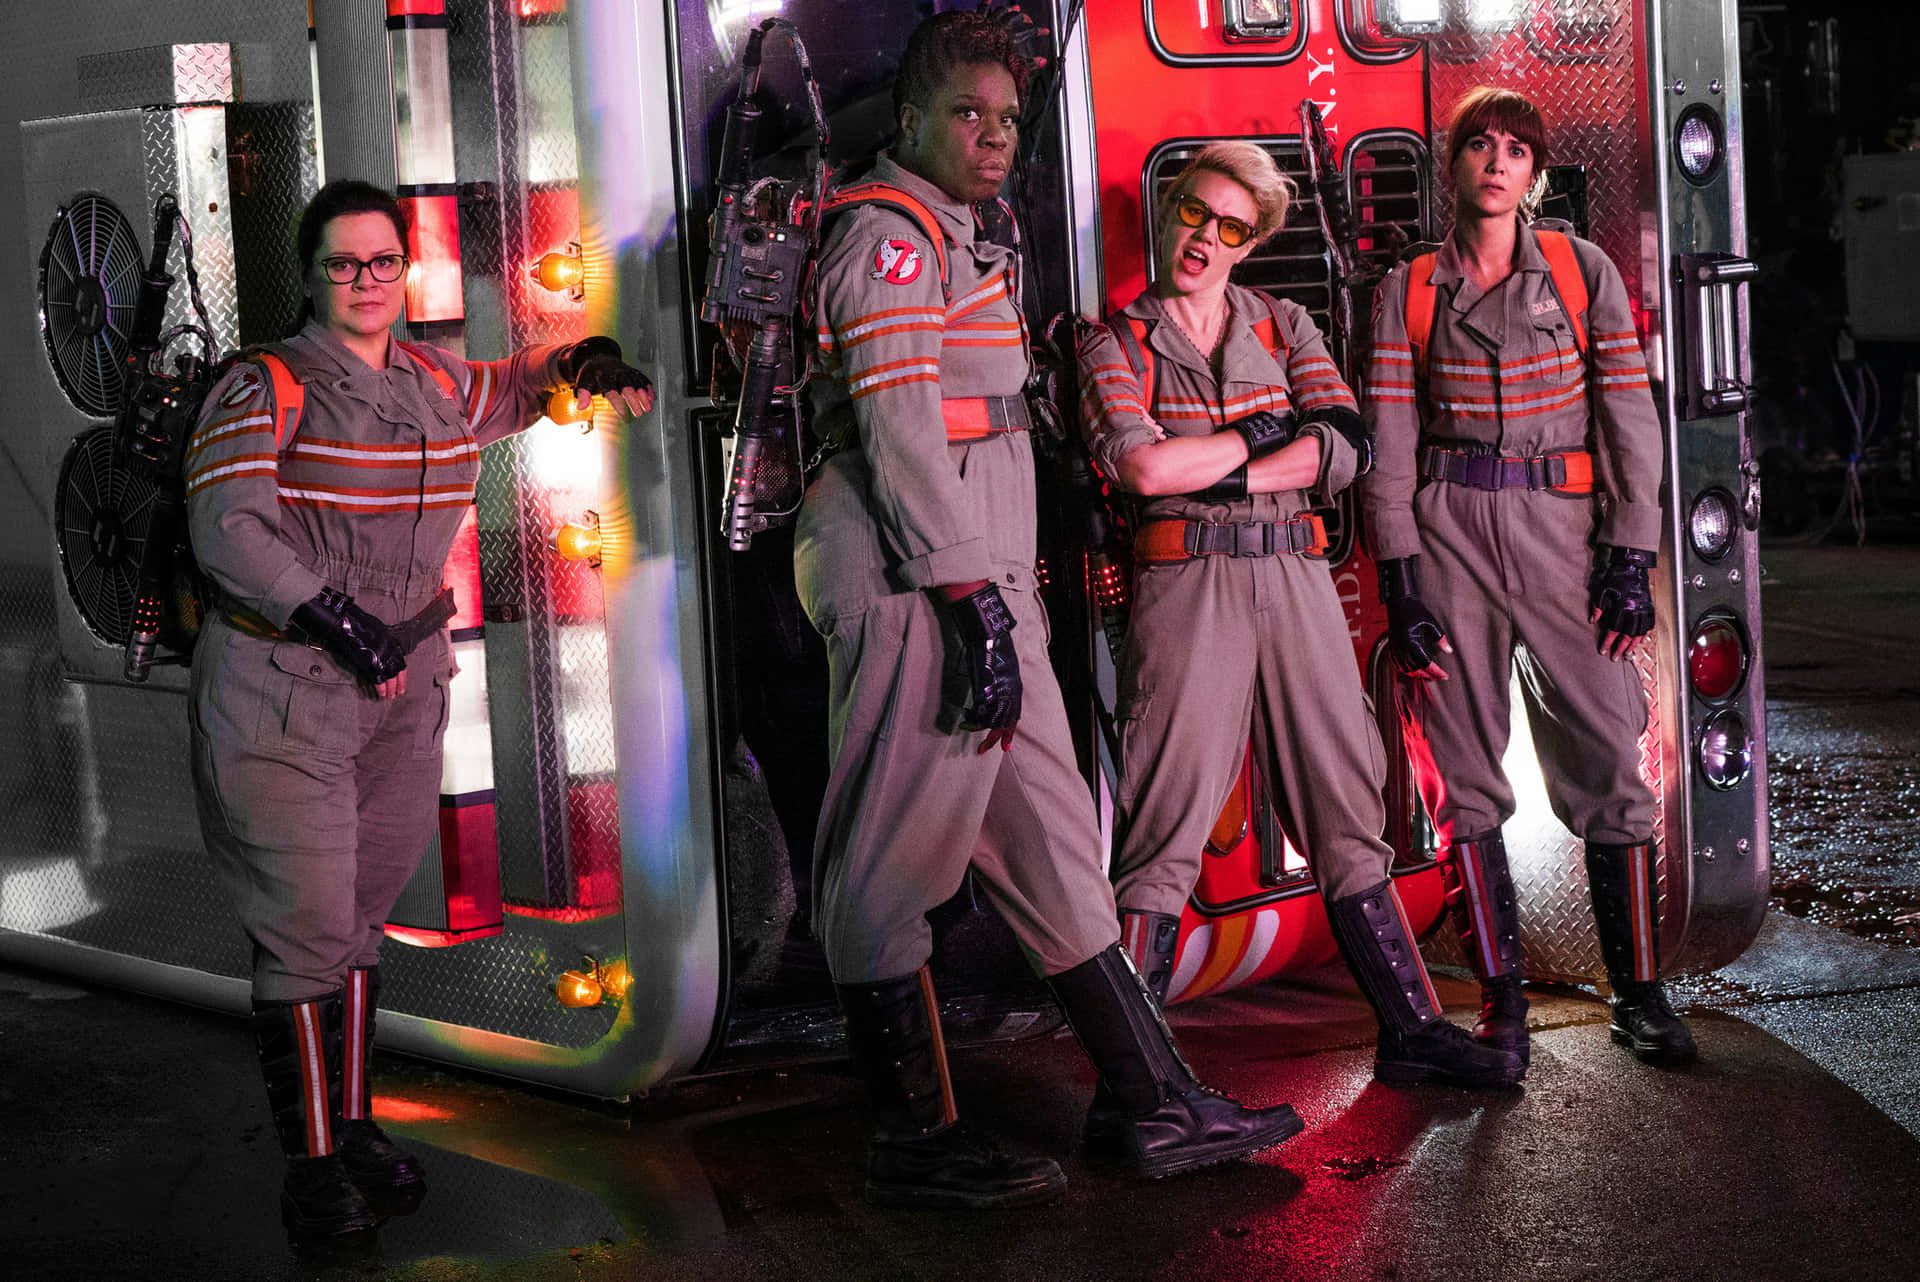 The Legendary Ghostbusters Squad in Action